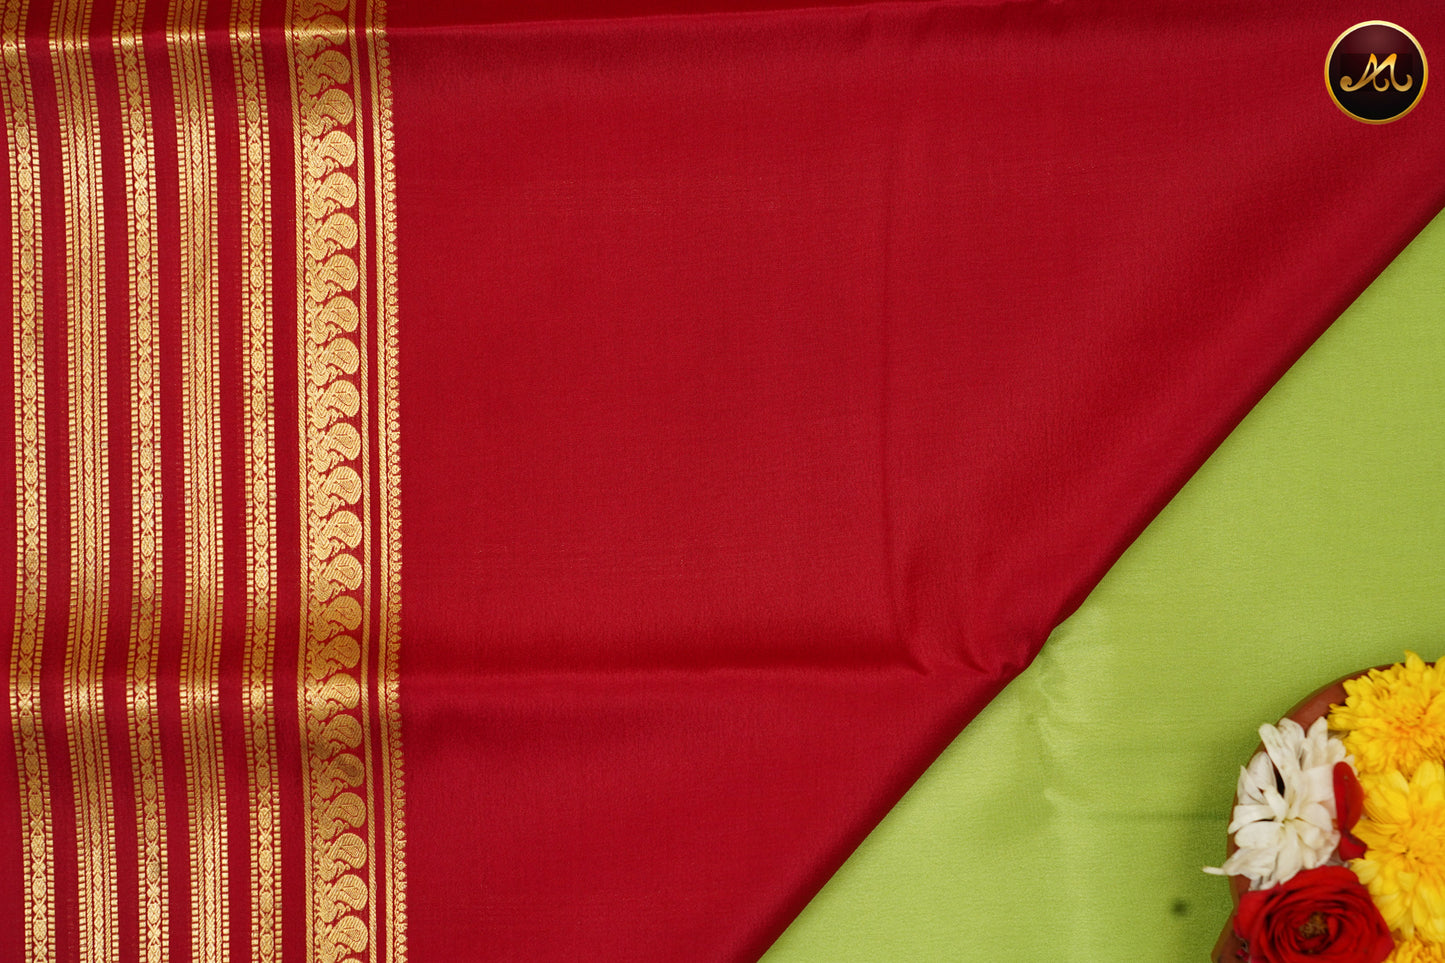 Mysore Crepe Silk saree in Lime Green and Red Colour combination with Gold zari Border and simple pallu